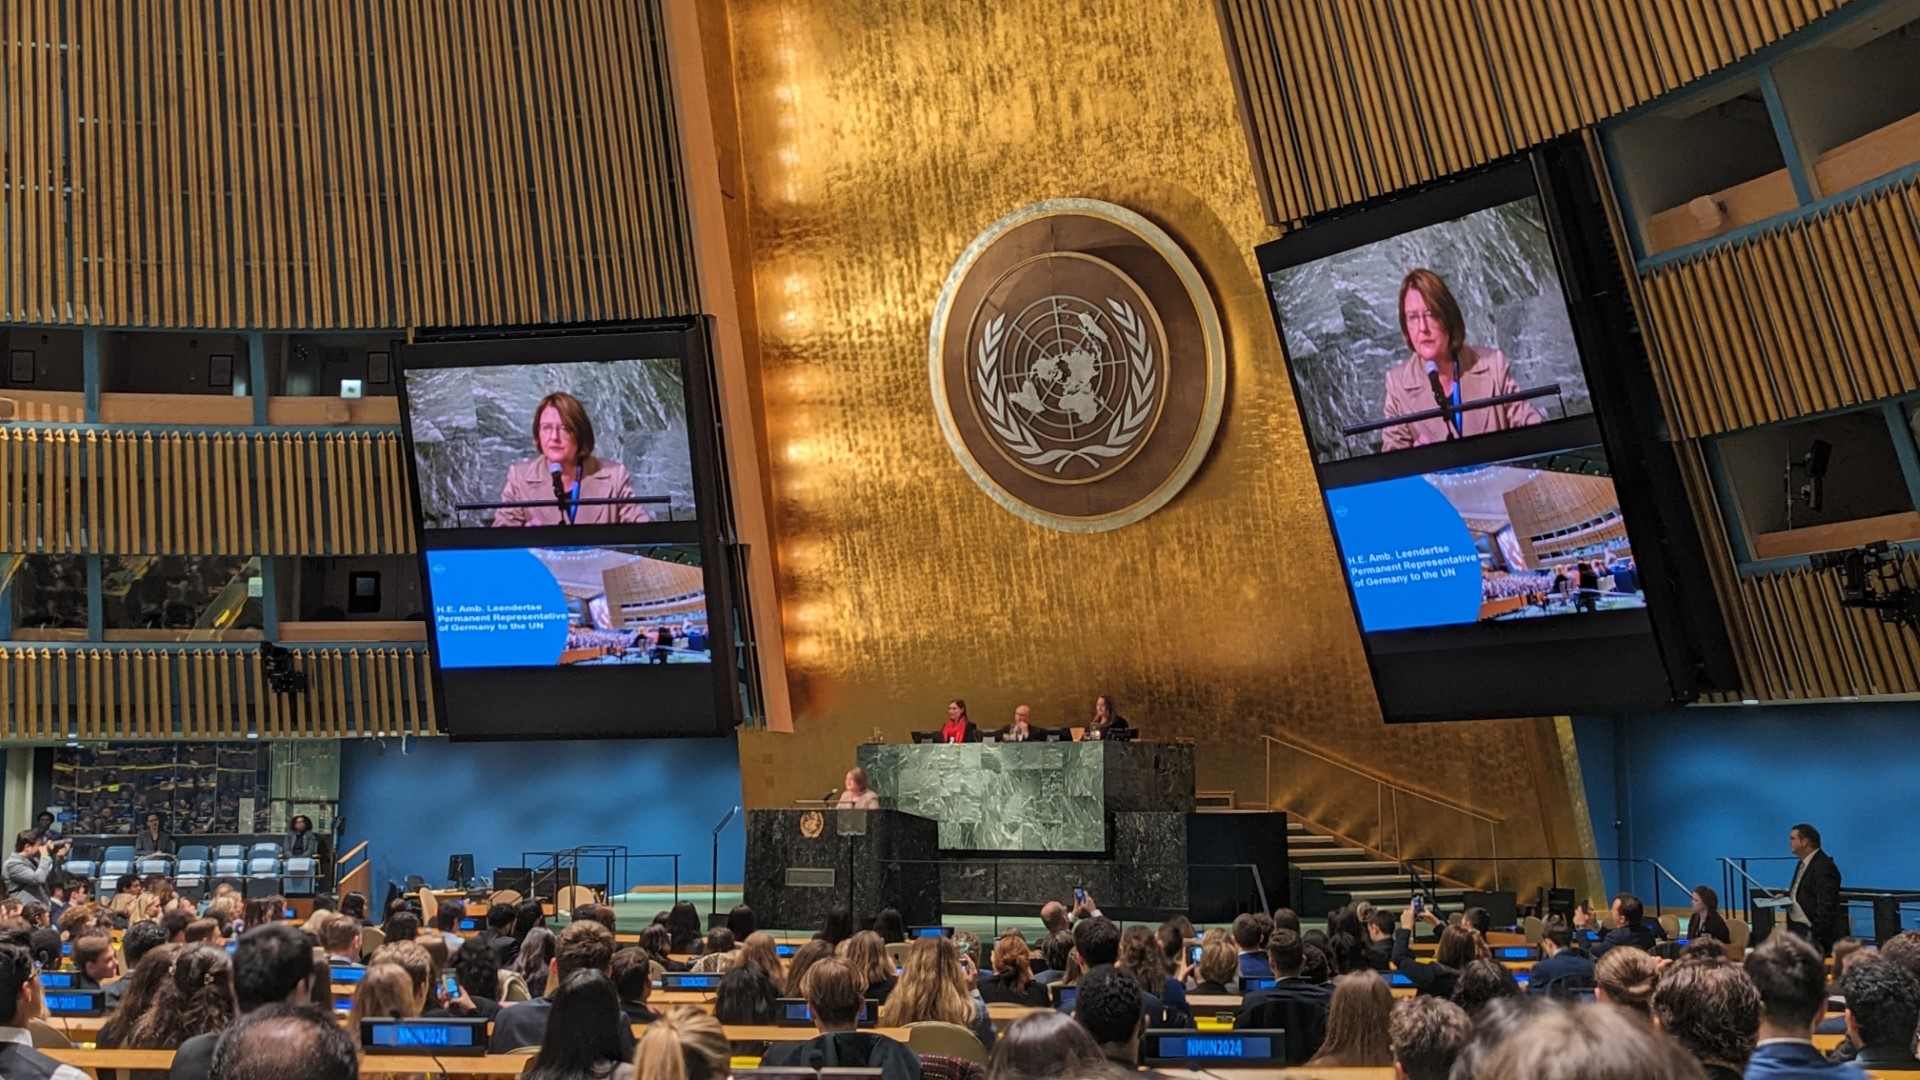  In the United Nations General Assembly Hall, a woman stands at a podium, speaking into a microphone. She is wearing a suit and has short brown hair. There is an emblem on the wall behind her. The hall is filled with people, mostly young people, who are sitting in rows of chairs. They are listening to the woman speak. On either side of the woman there are two large screens which show a close up of her face.